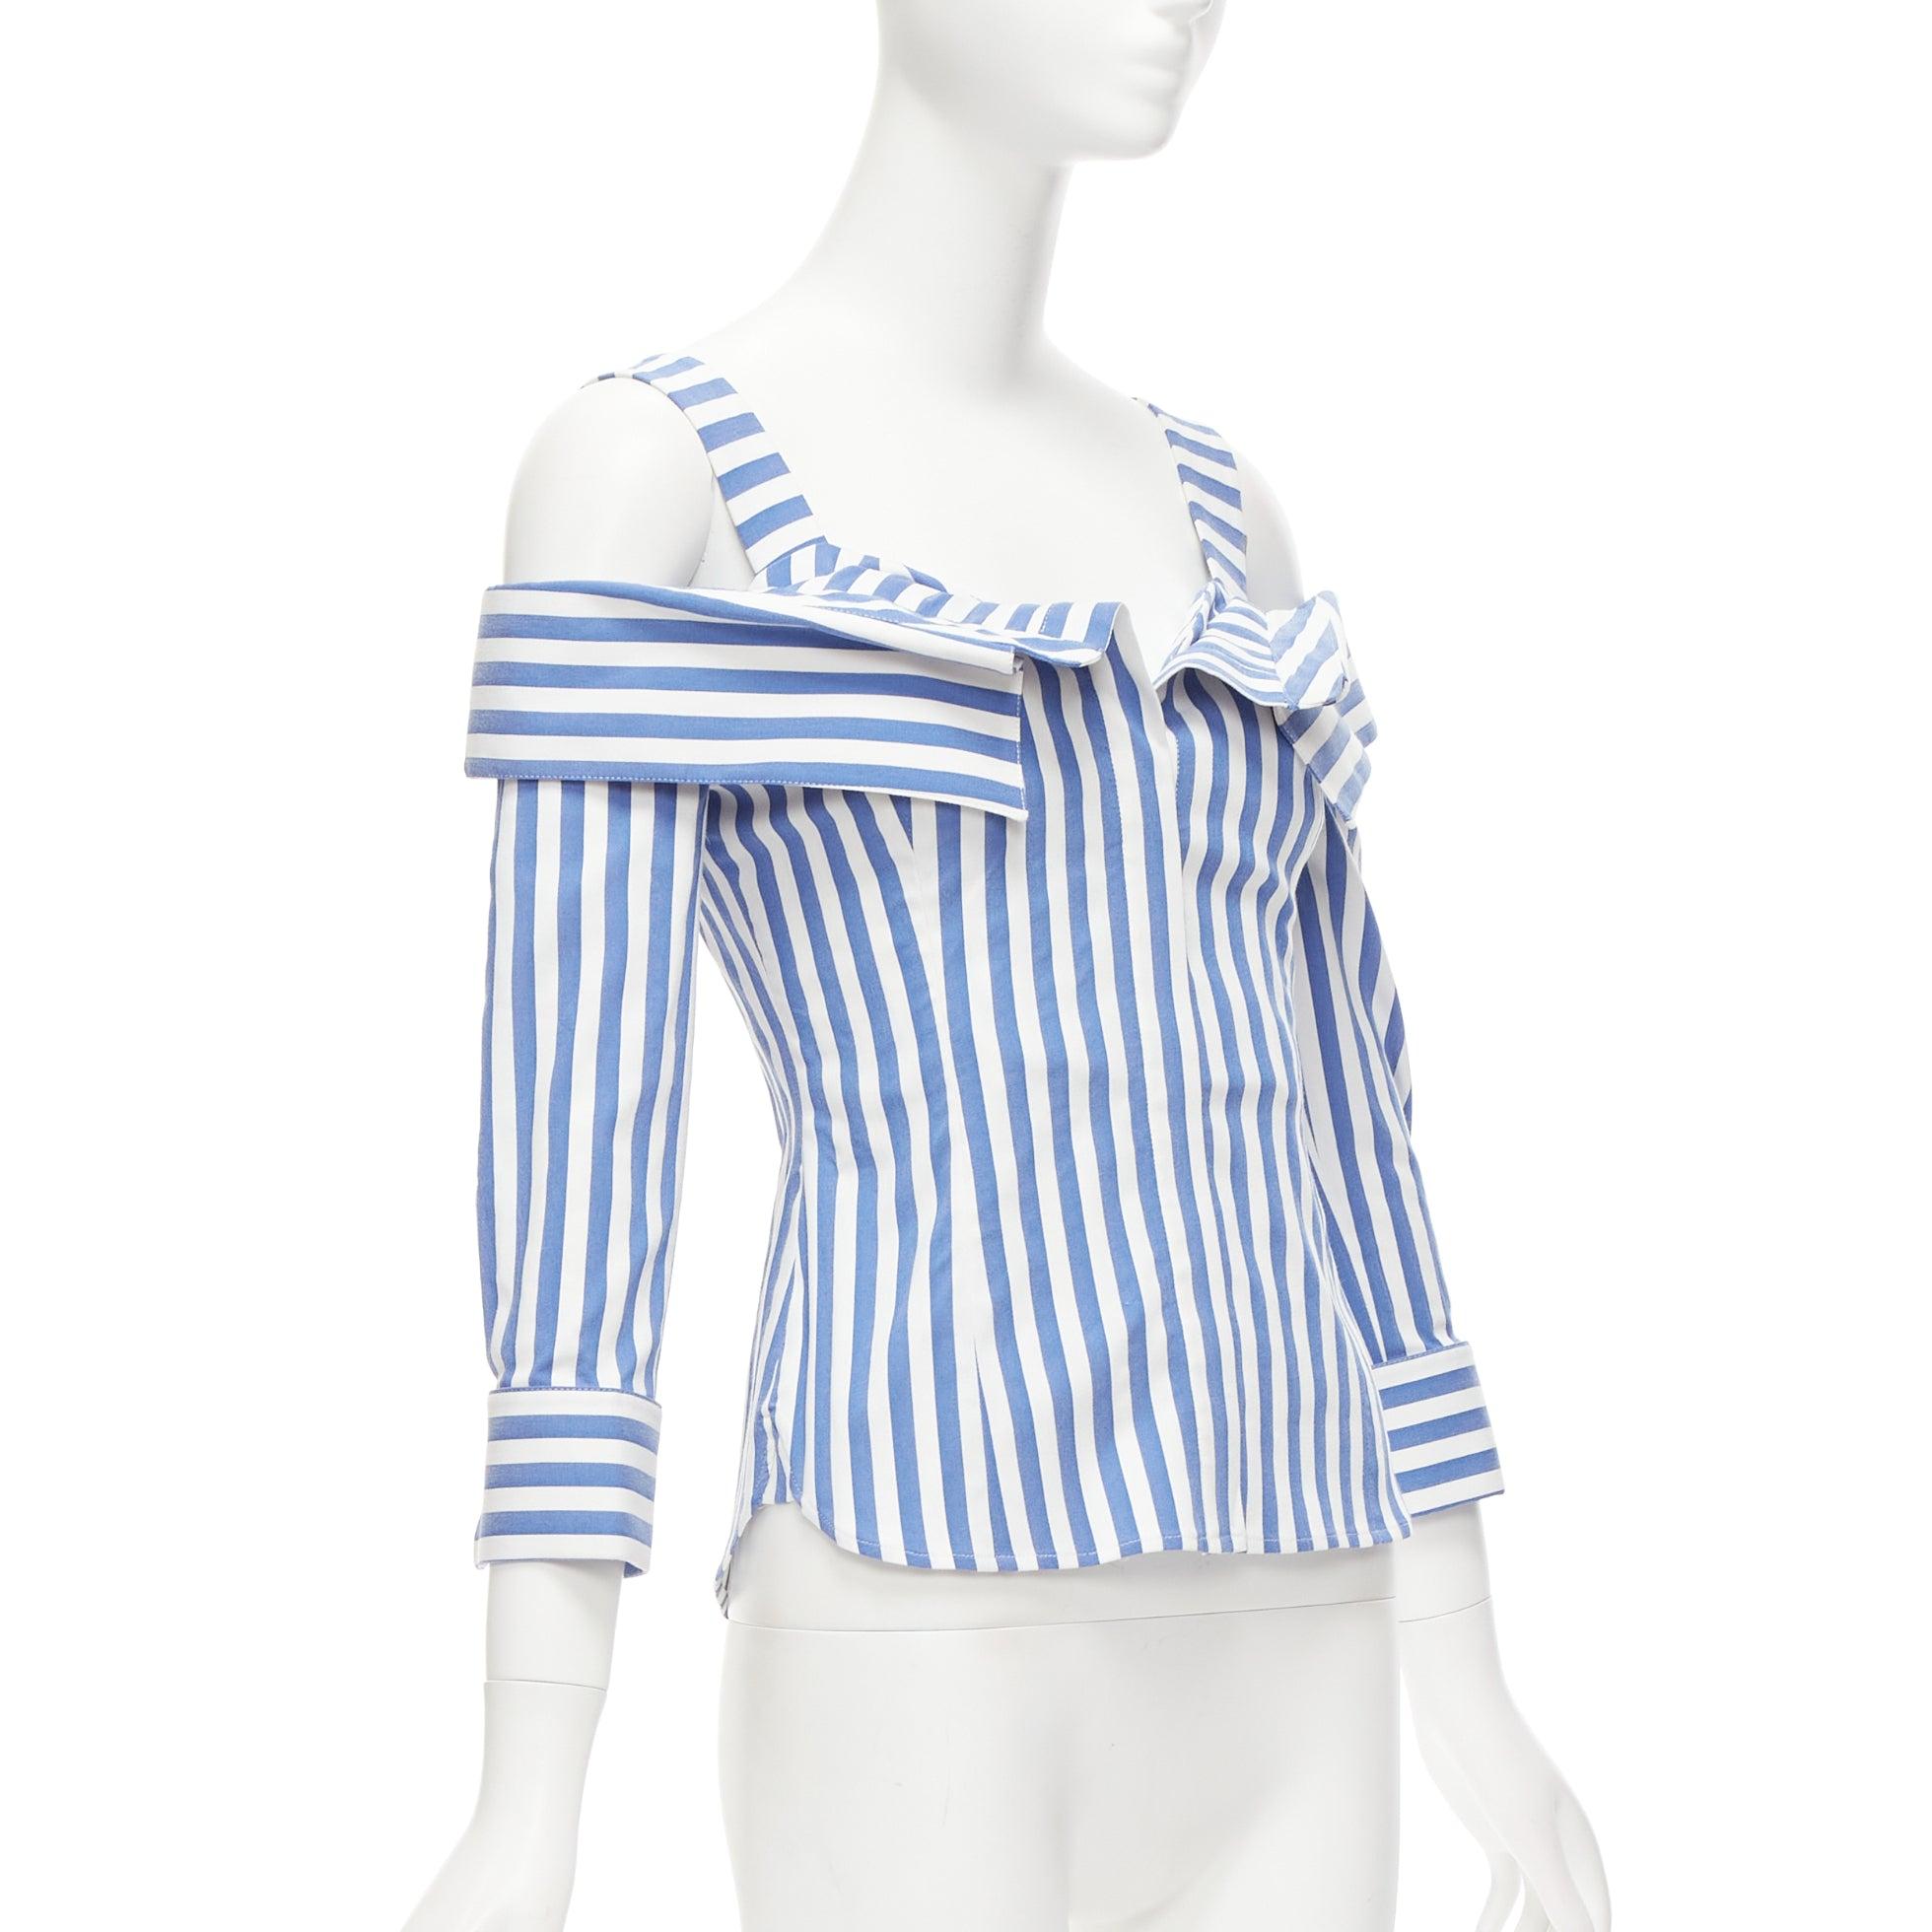 MONSE blue white striped cold shoulder corseted cropped sleeve top US0 XS
Reference: YIKK/A00056
Brand: Monse
Material: Polyester, Blend
Color: White, Blue
Pattern: Striped
Closure: Zip
Lining: Multicolour Fabric
Extra Details: Double layer back zip